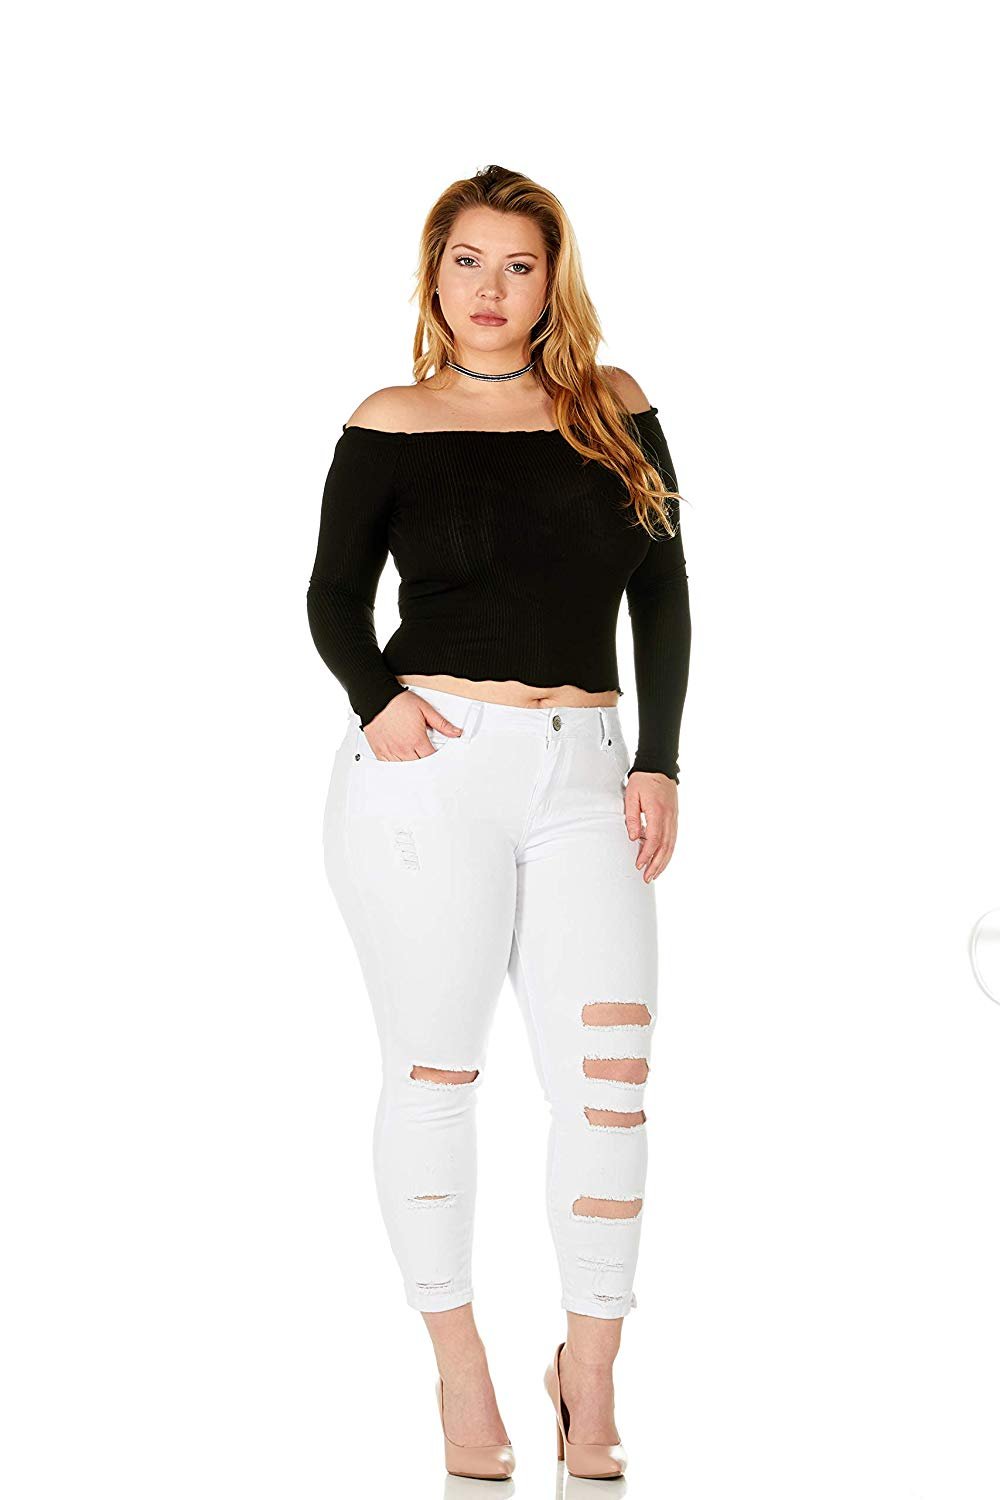 CG JEANS Plus Size Cute Juniors Big Mid Rise Large Ripped Torn Crop Skinny Fit, White Denim 24 - image 4 of 7